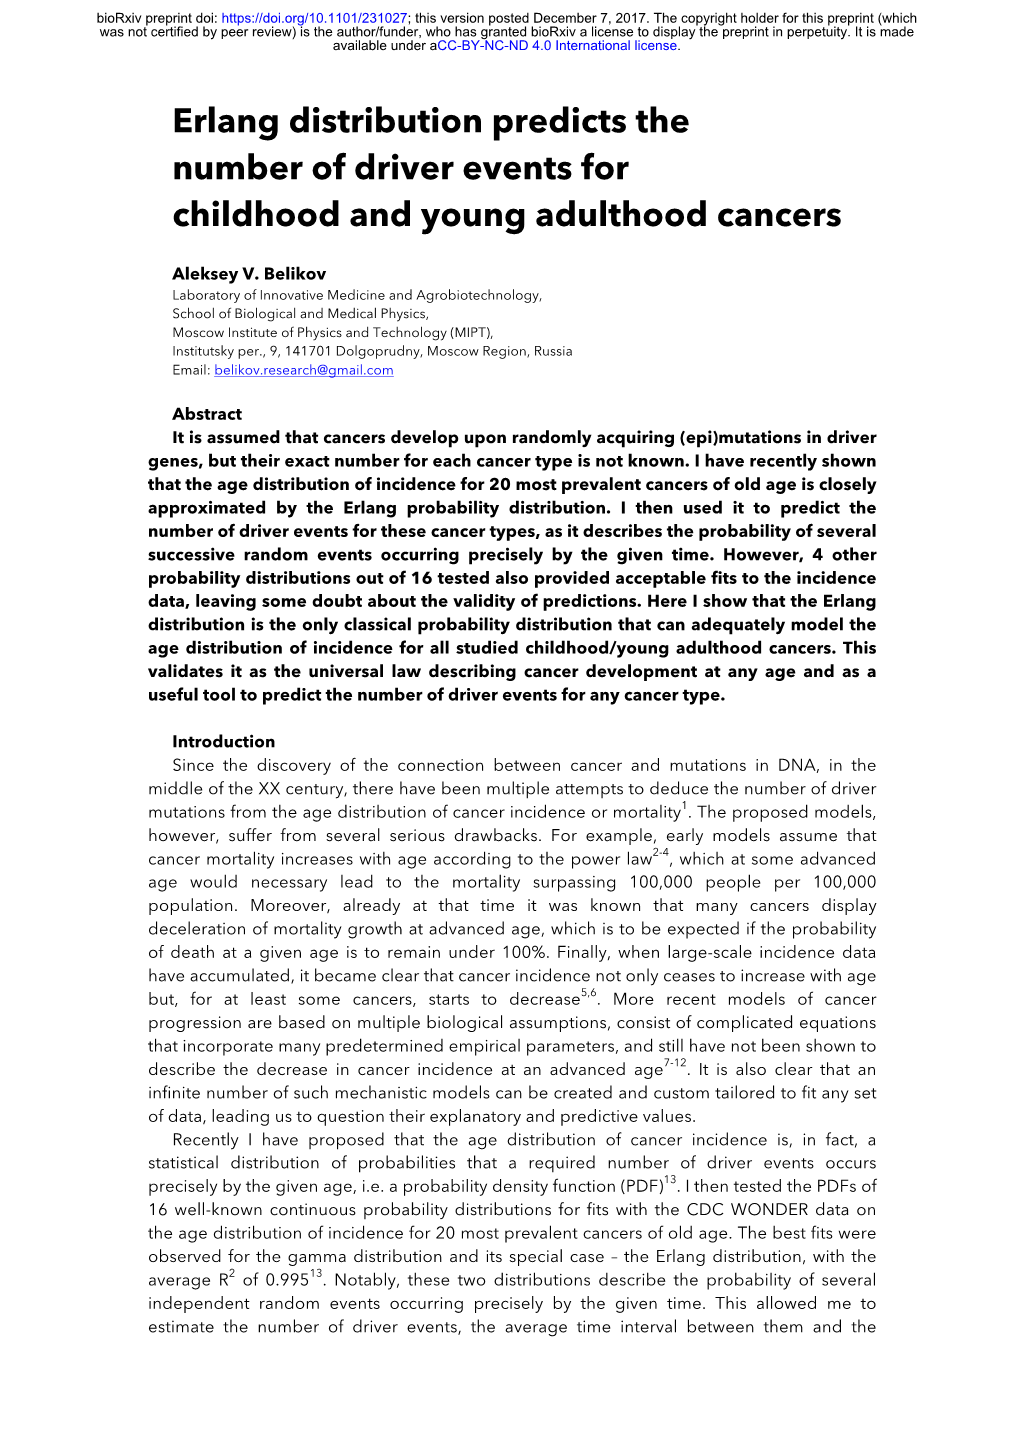 Erlang Distribution Predicts the Number of Driver Events for Childhood and Young Adulthood Cancers